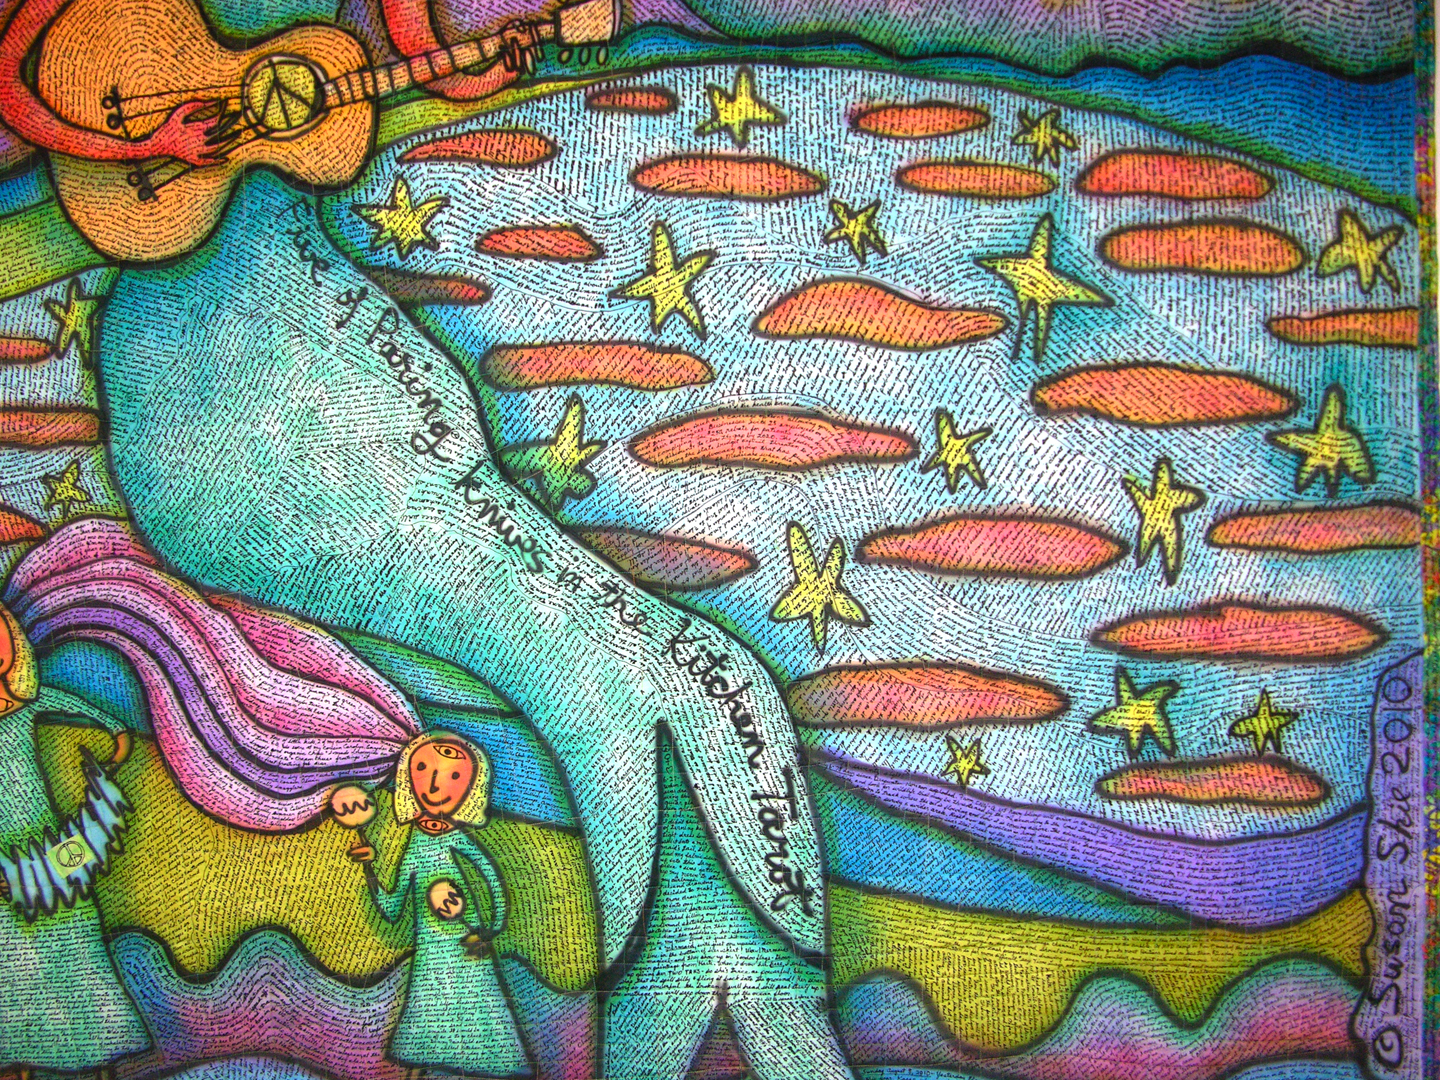 Stars on the Water detail view. ©Susan Shie 2010.